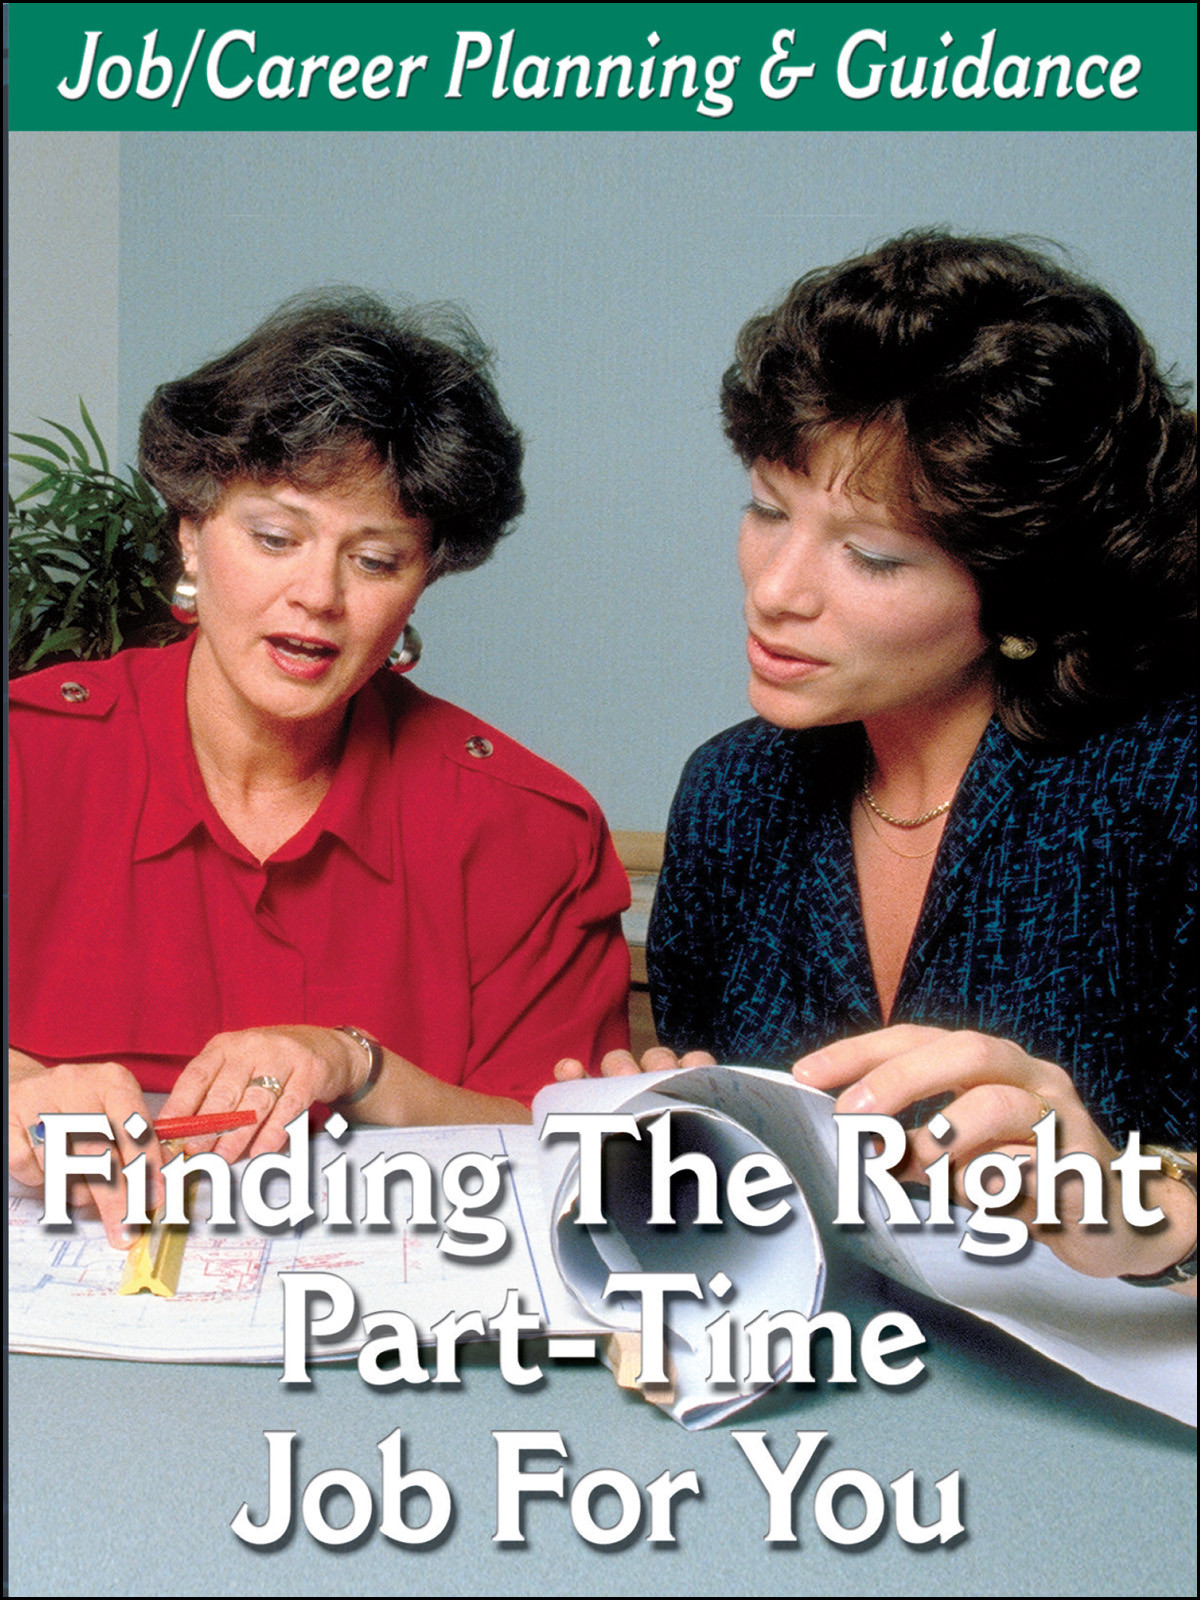 L916 - Career Planning How to Find The Right Part-Time Job